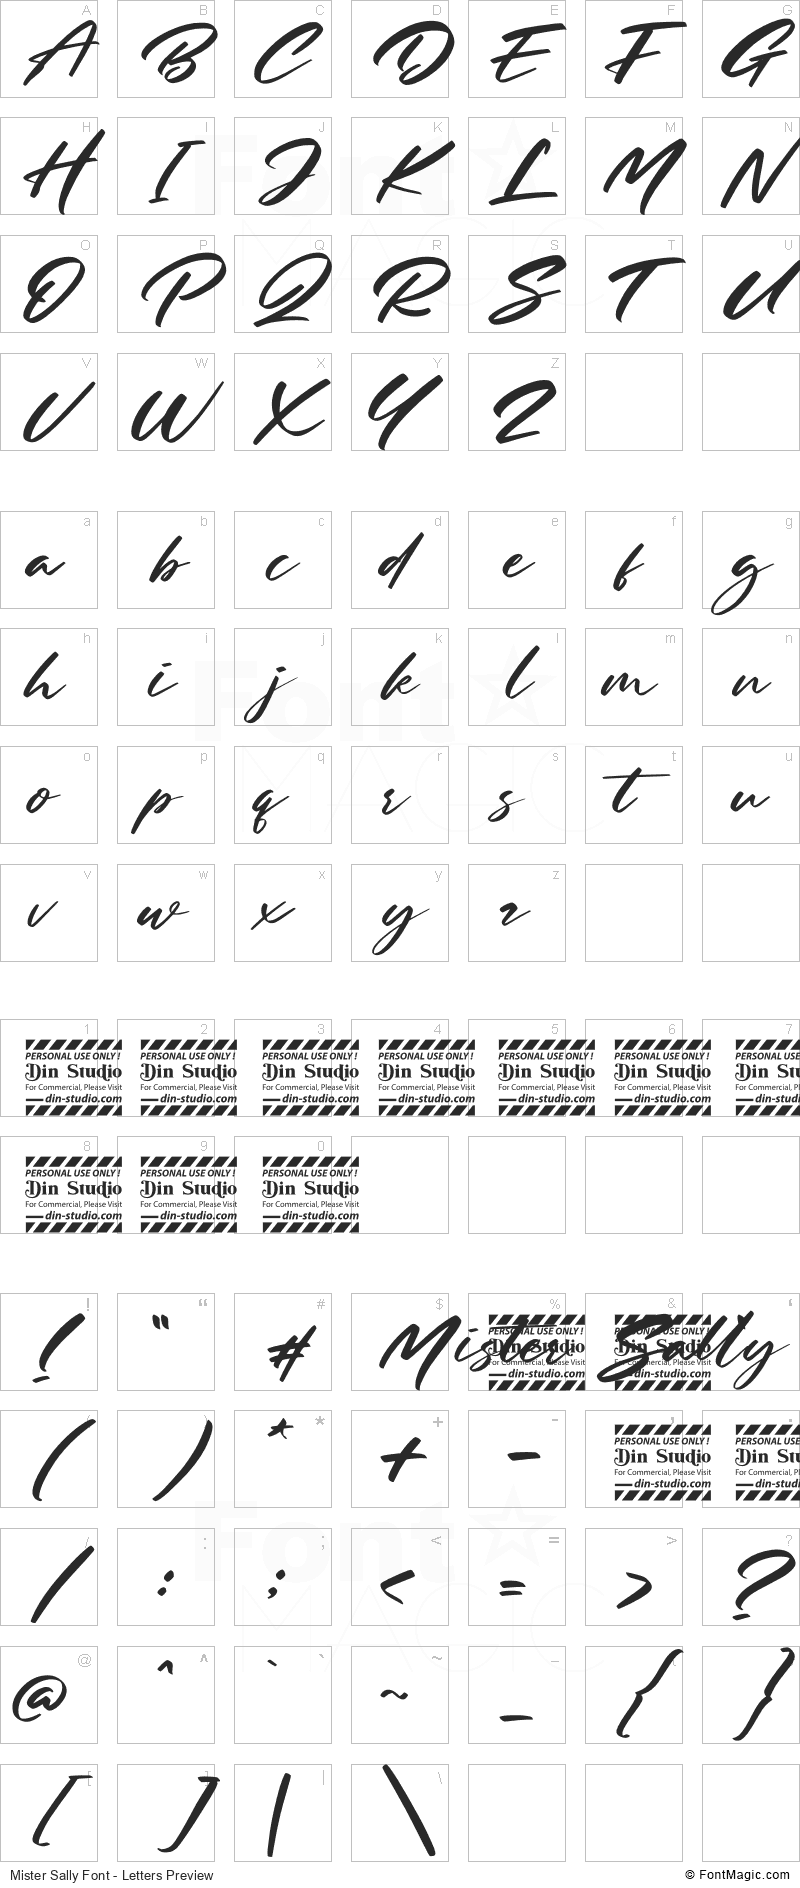 Mister Sally Font - All Latters Preview Chart